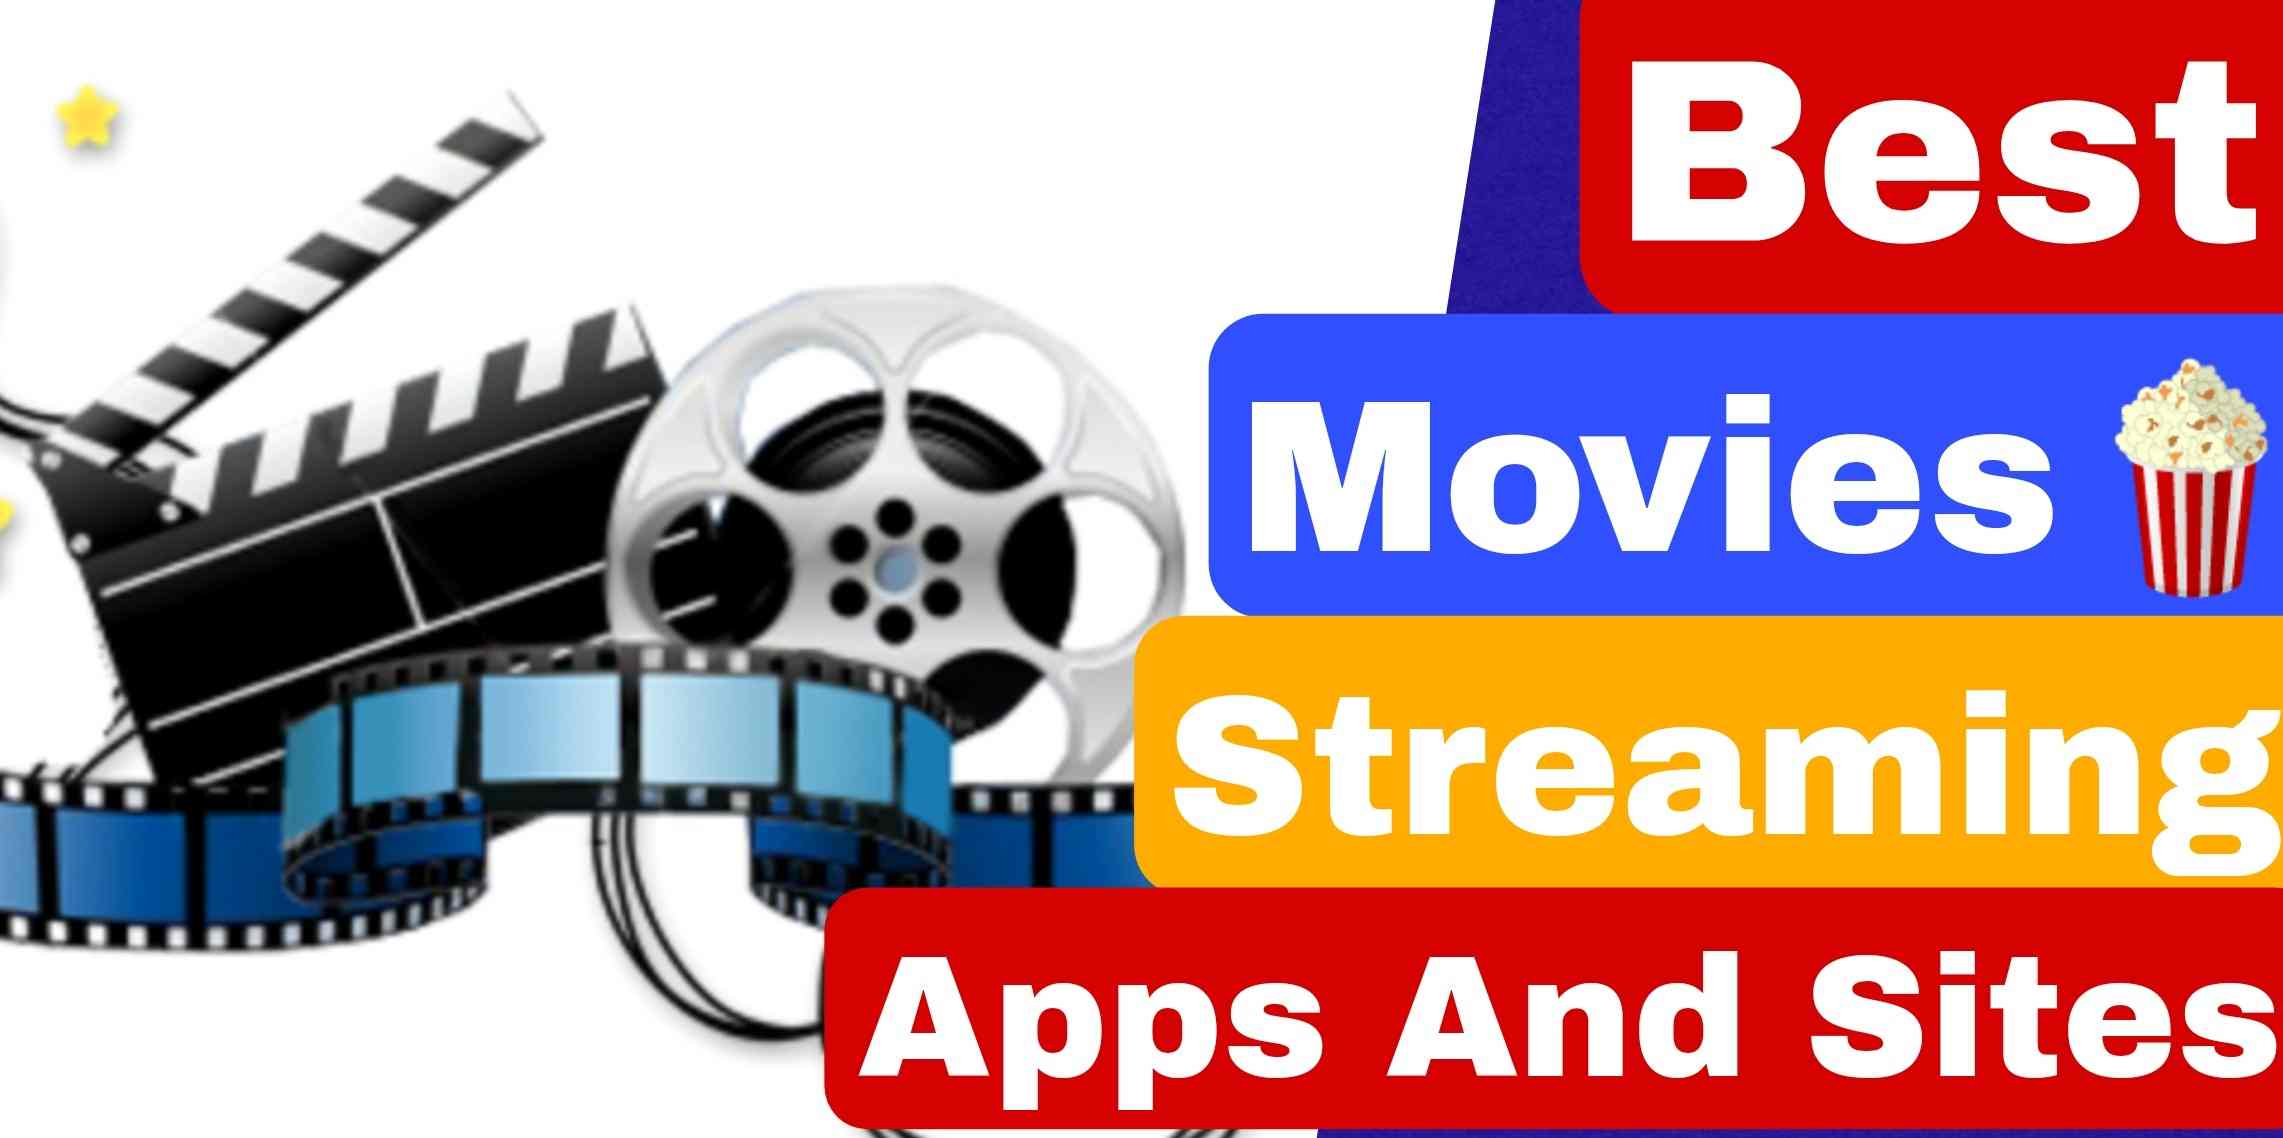 watch hindi movies online free without downloading